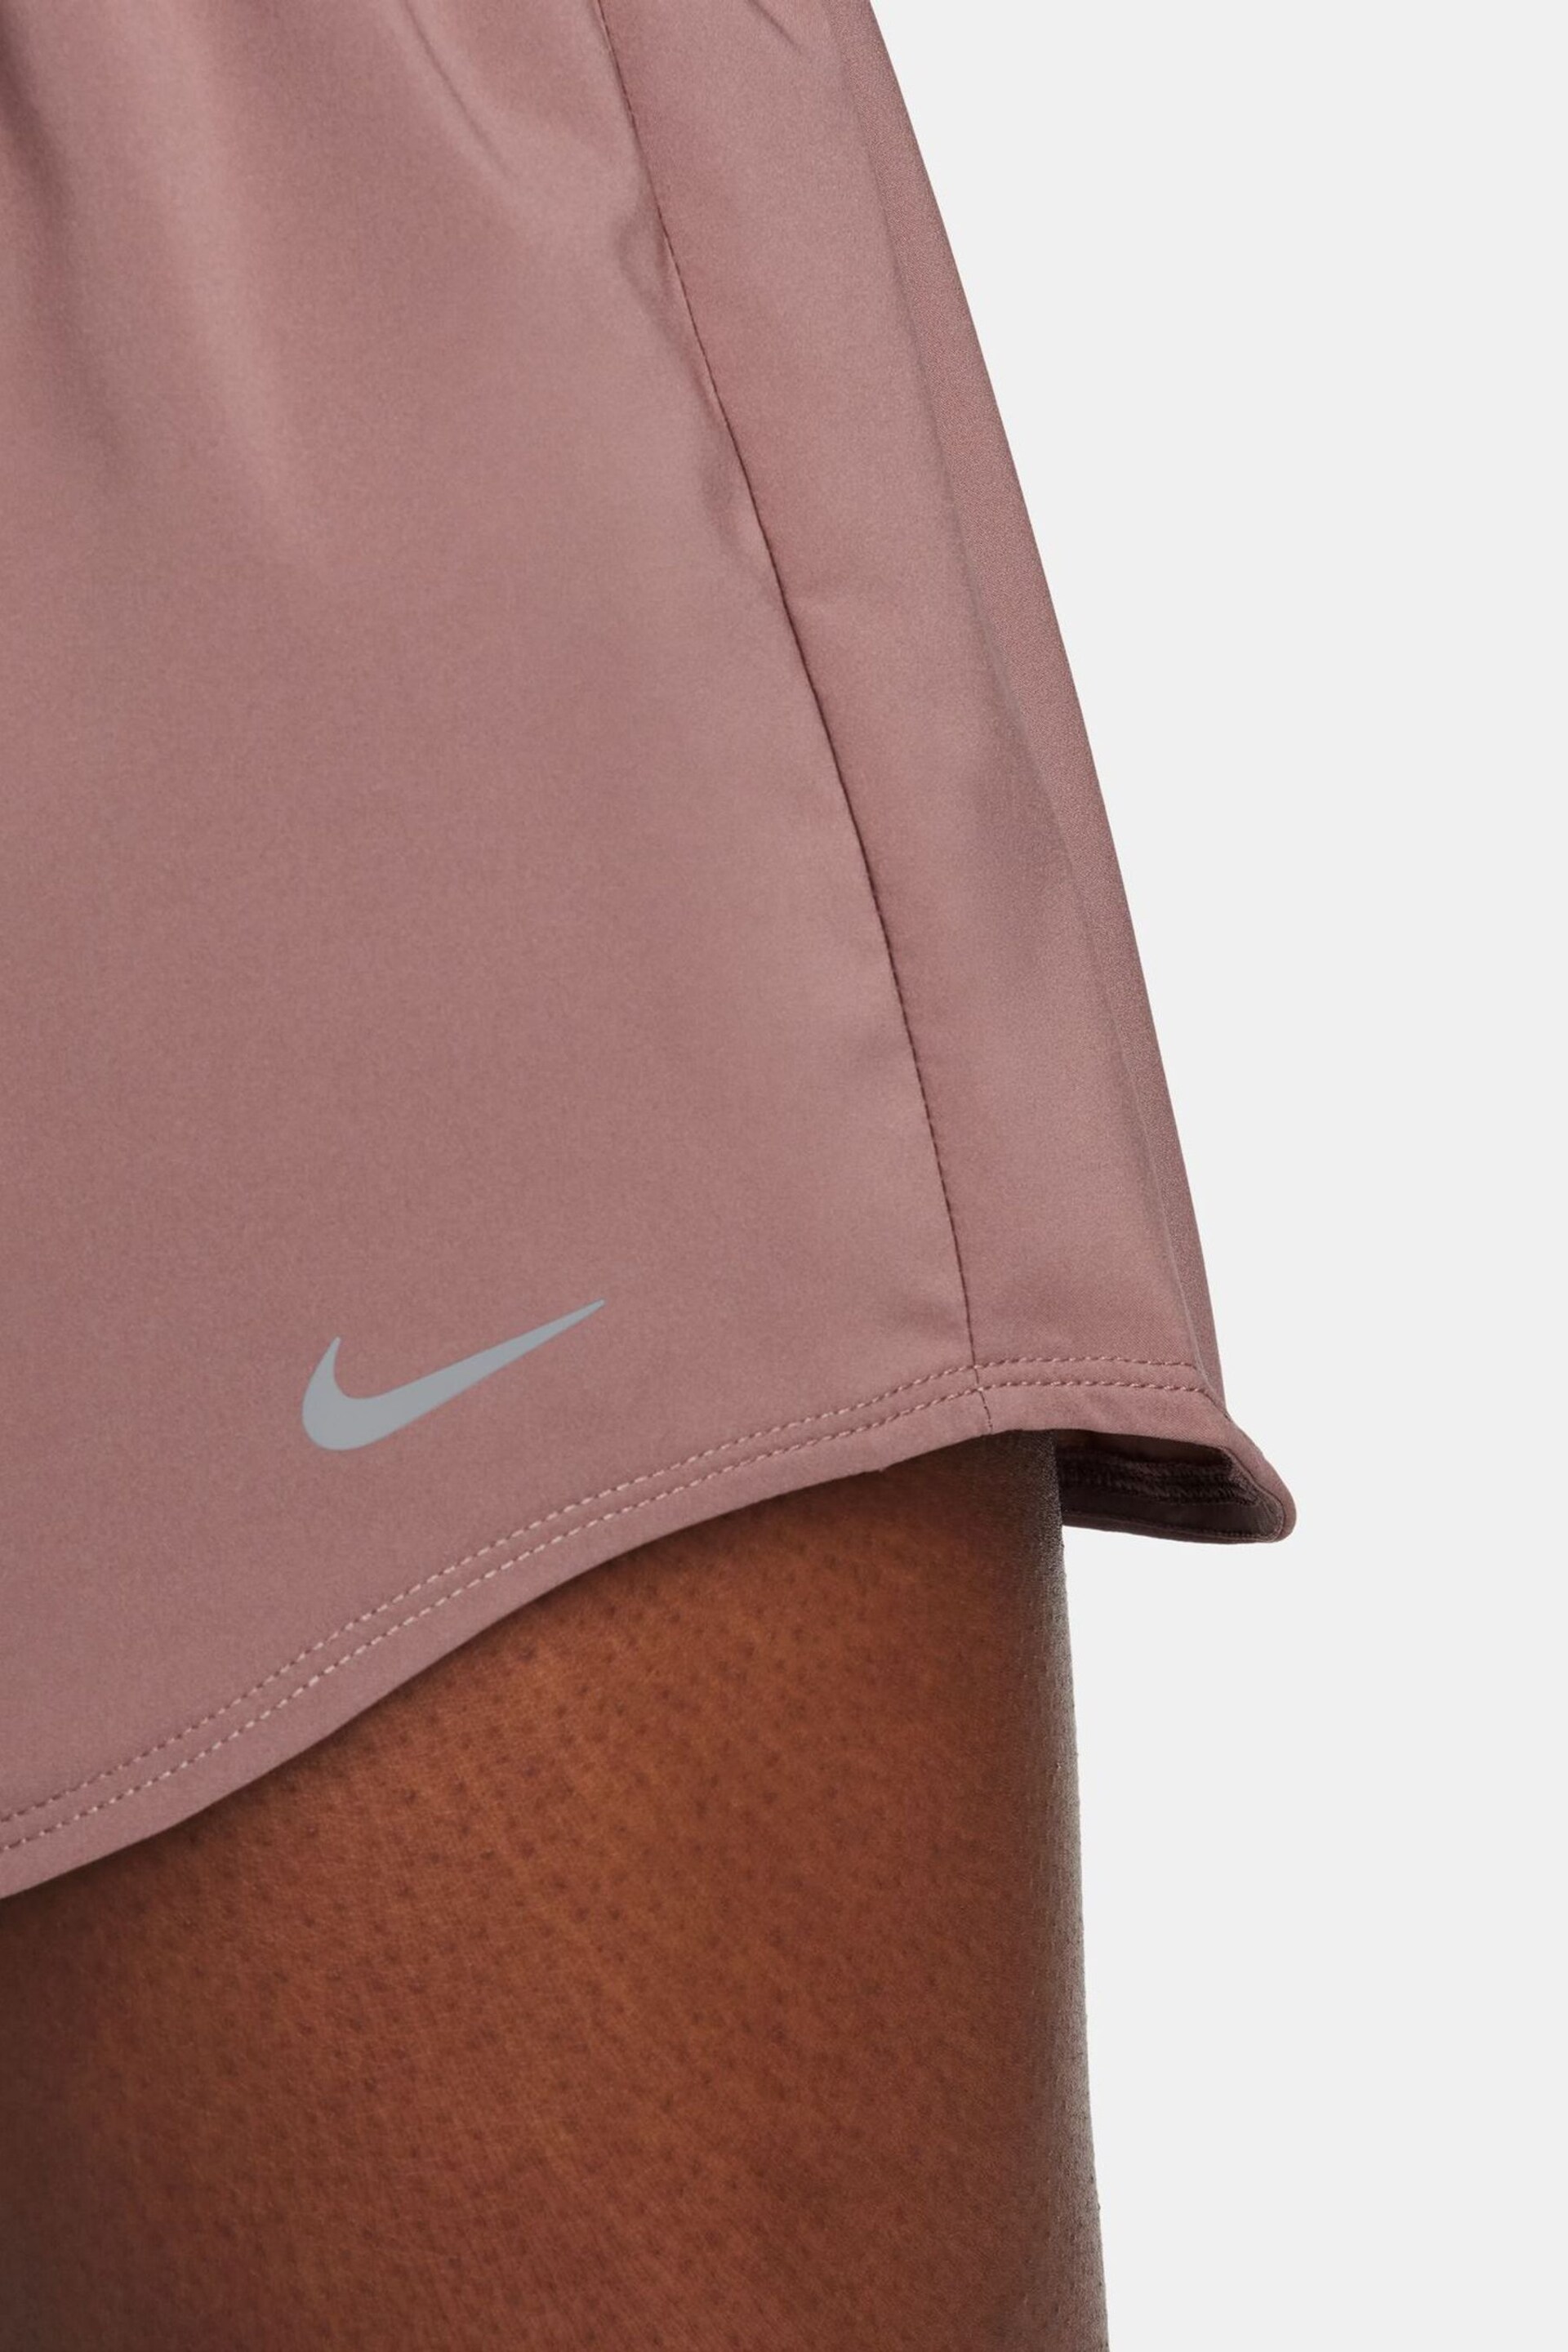 Nike Brown Dri-FIT One Mid Rise 3 Brief Lined Shorts - Image 6 of 6